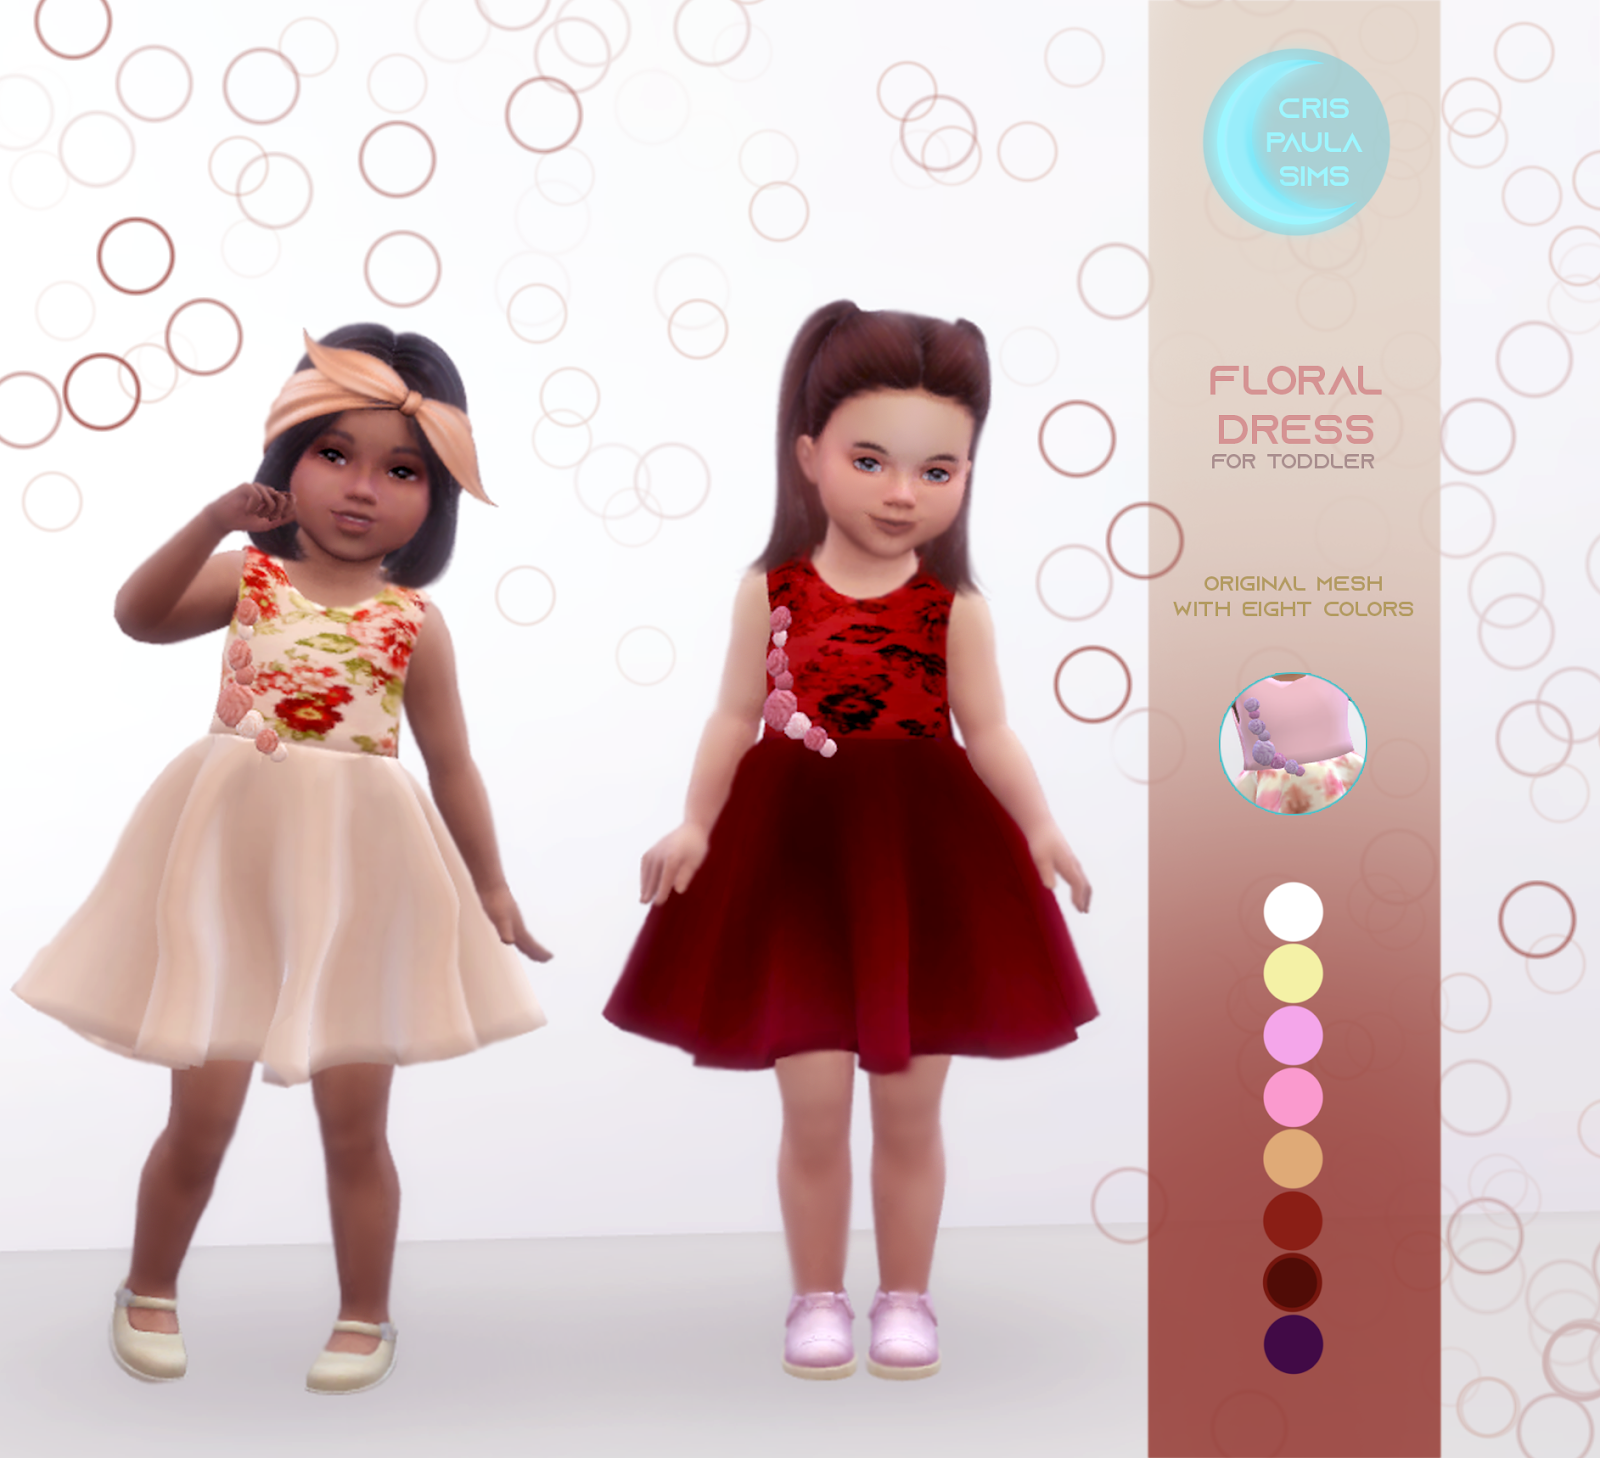 The Sims 4 Floral Dress For Toddler Cris Paula Sims